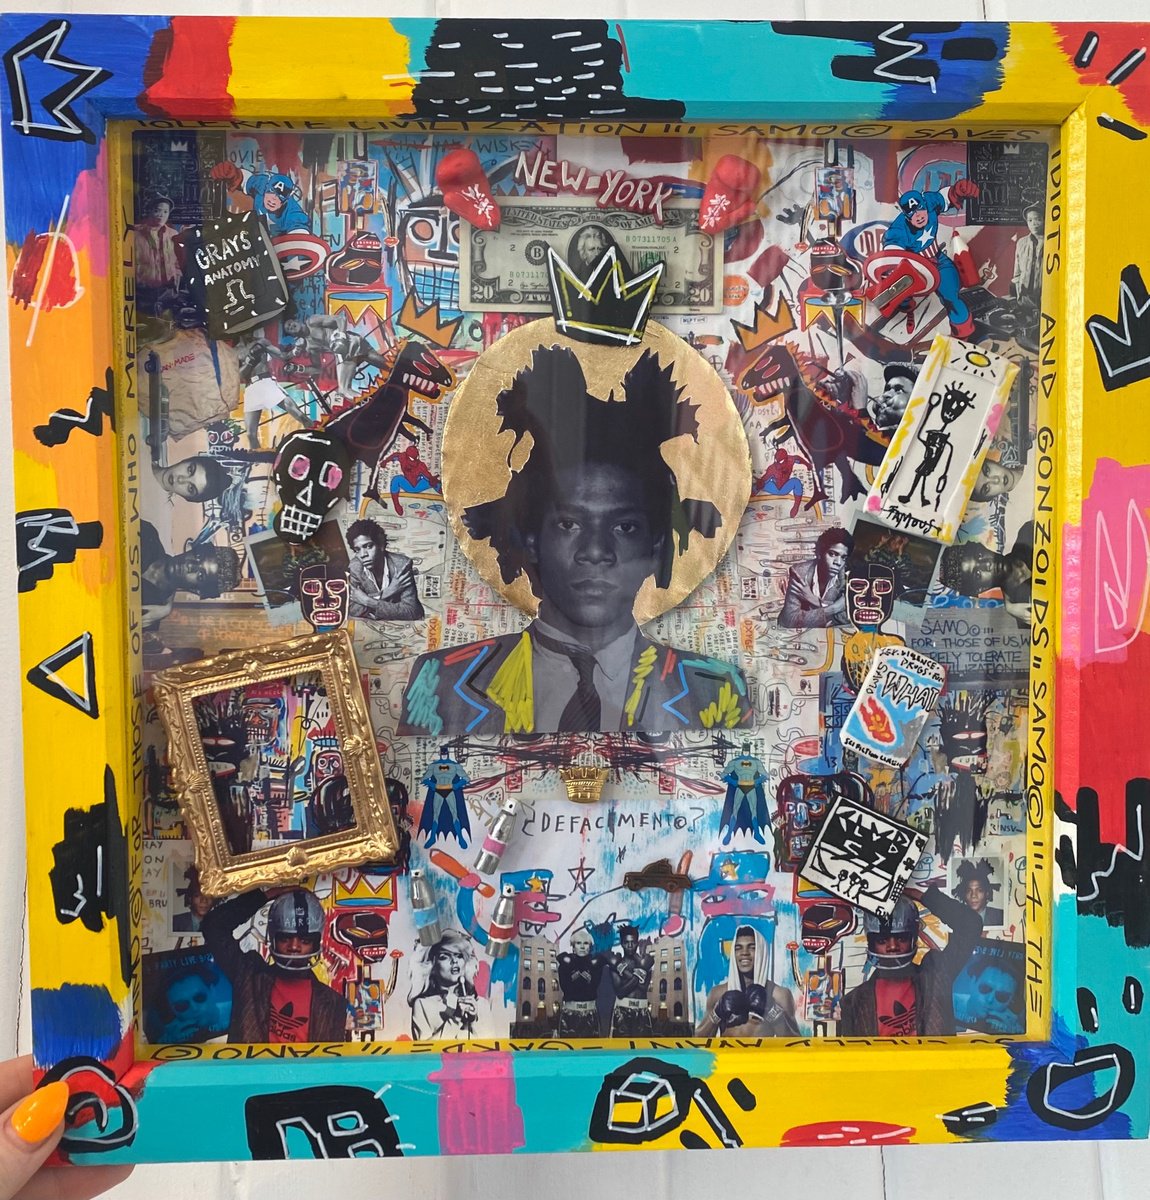 Jean-Michel Basquiat Icon: I Wish You Were Here to See What You’ve Become by Carson Parkin-Fairley